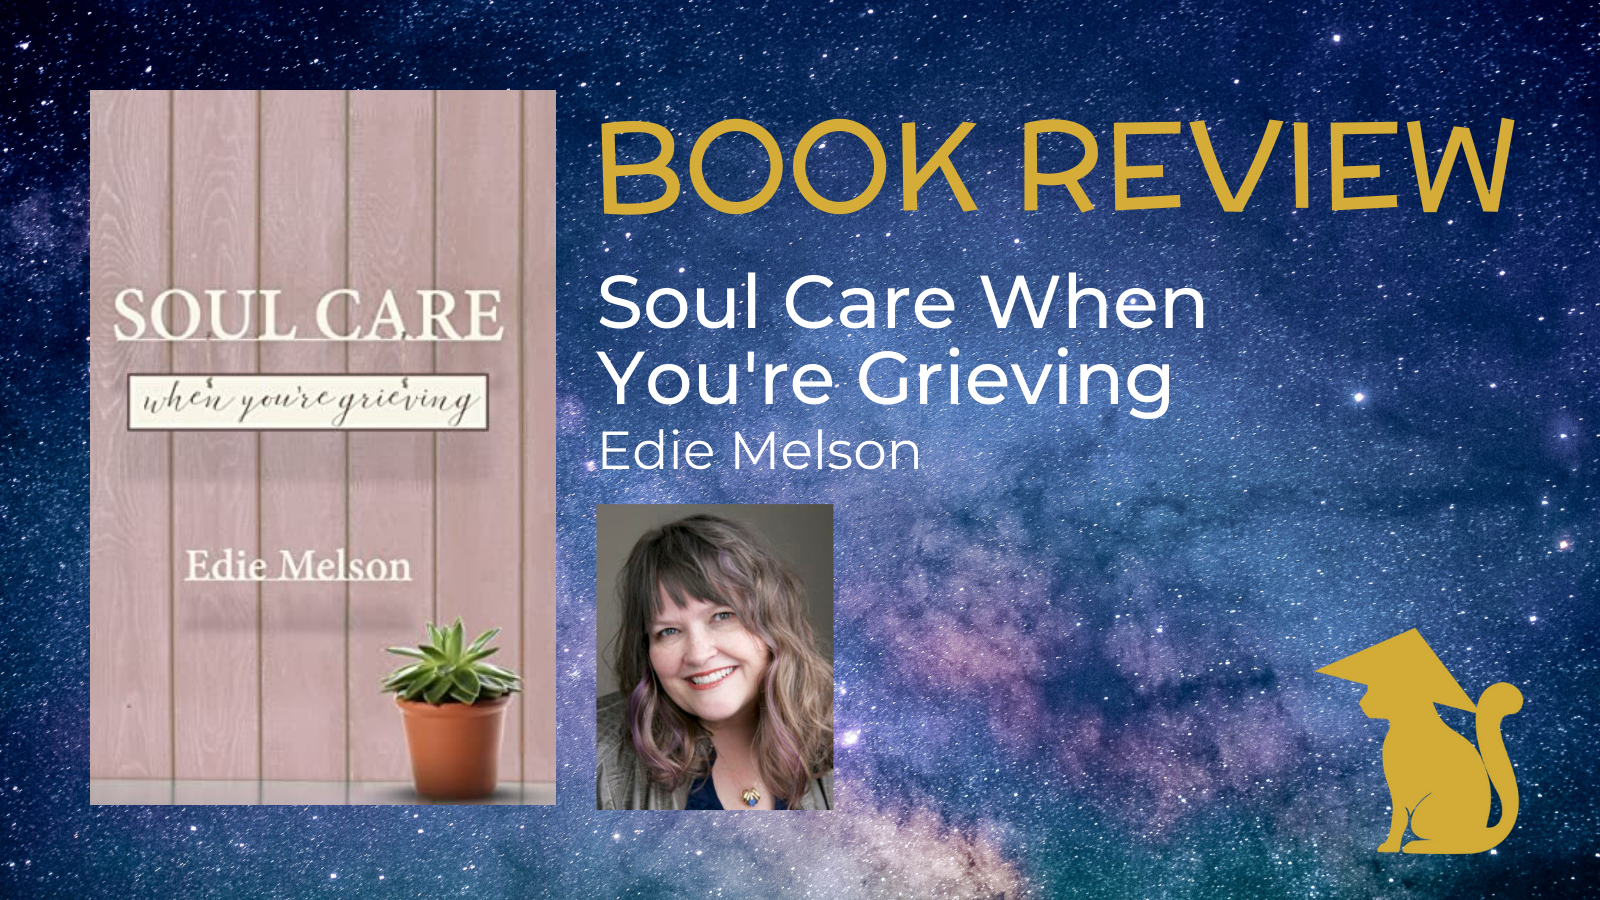 You are currently viewing Soul Care When You’re Grieving by Edie Melson